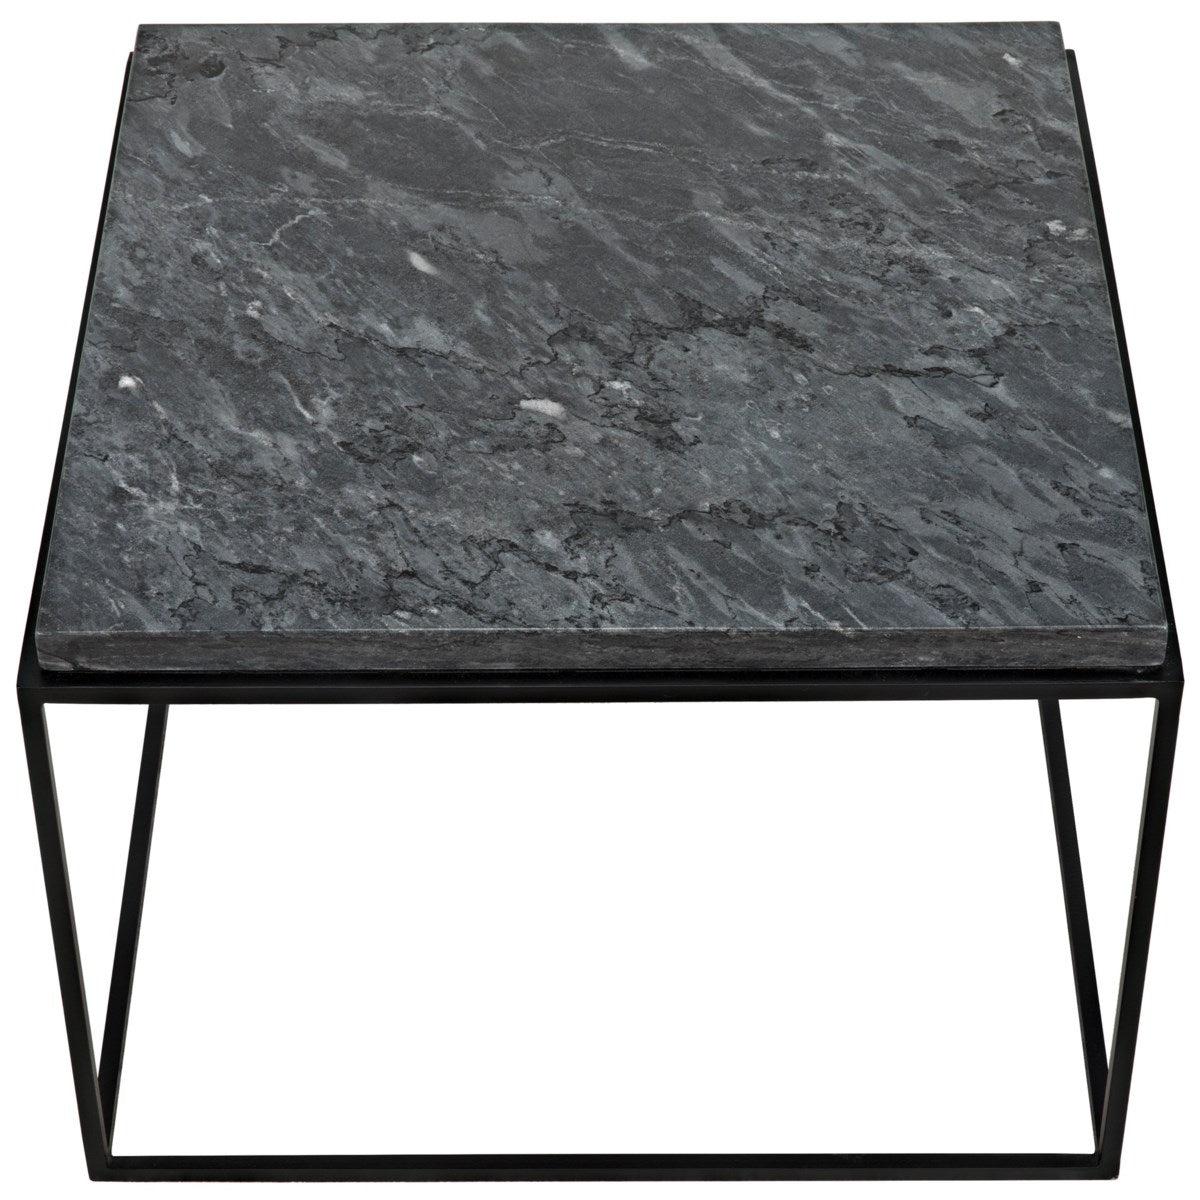 Noir Furniture Lomax Coffee Table, Black Metal Finish with Black Stone-Noir Furniture-Blue Hand Home